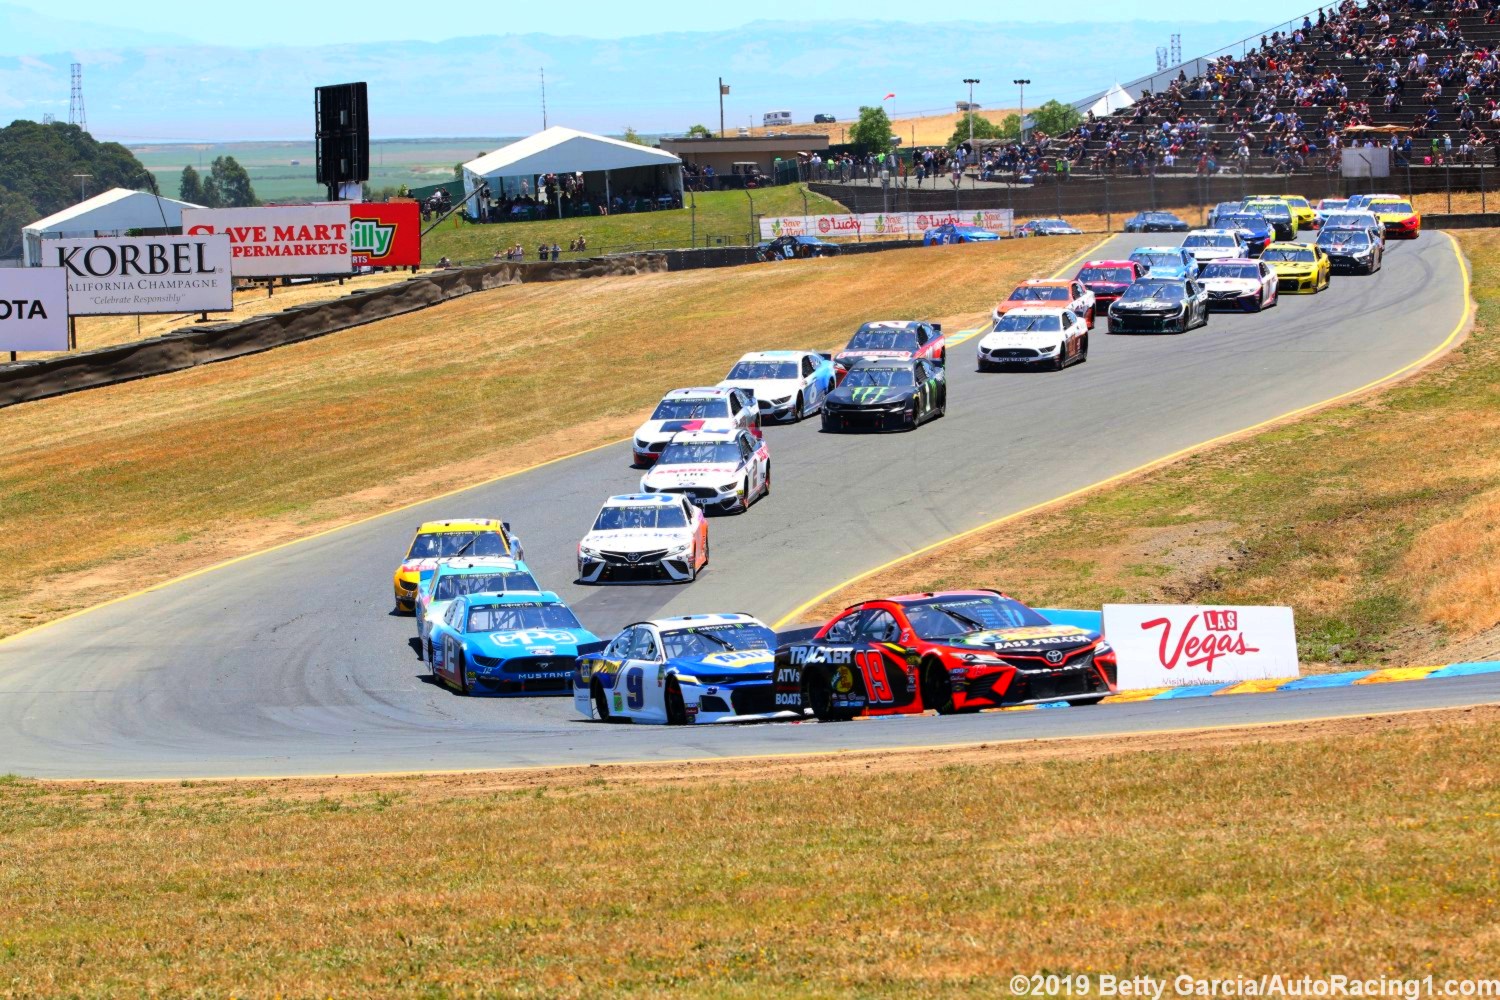 In the craziest thing ever, the Sonoma race will run at the Charlotte Speedway